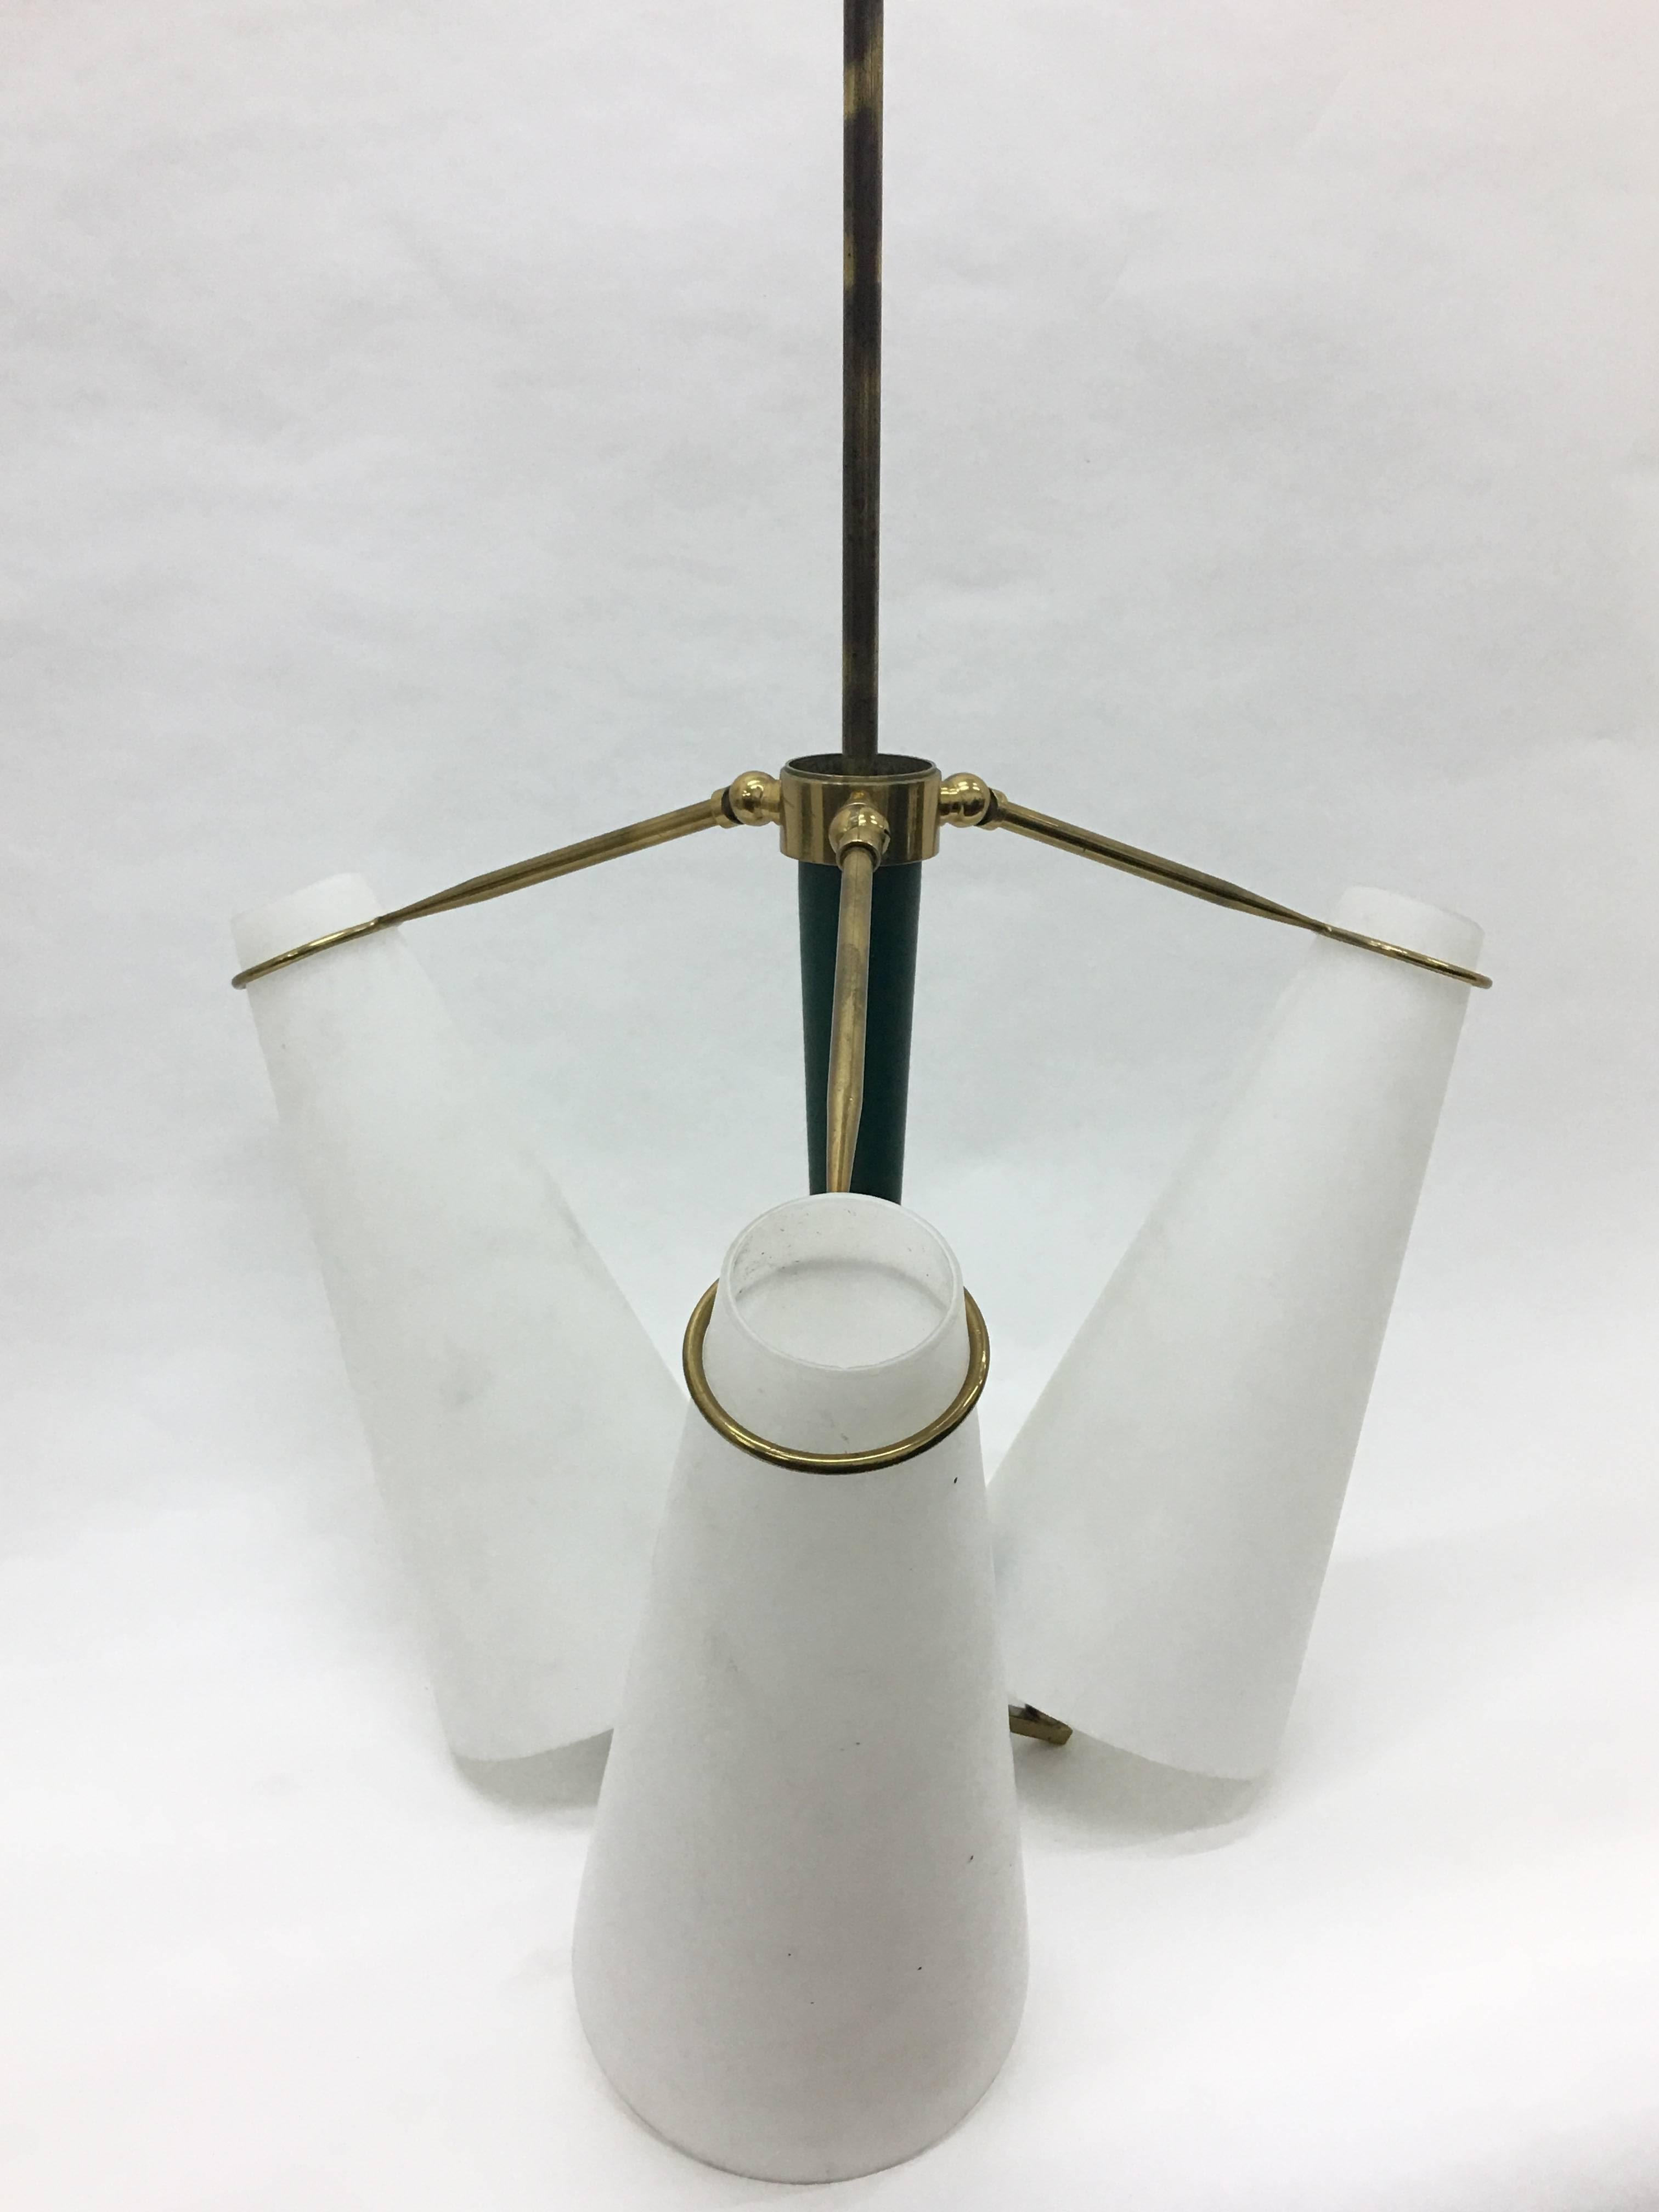 Three-light chandelier in the style of Stilnovo with articulated brass arms, green metal central part and white glasses. Fully restored electrical parts. It works with both 110 and 220 Volt and needs regular e14 bulbs